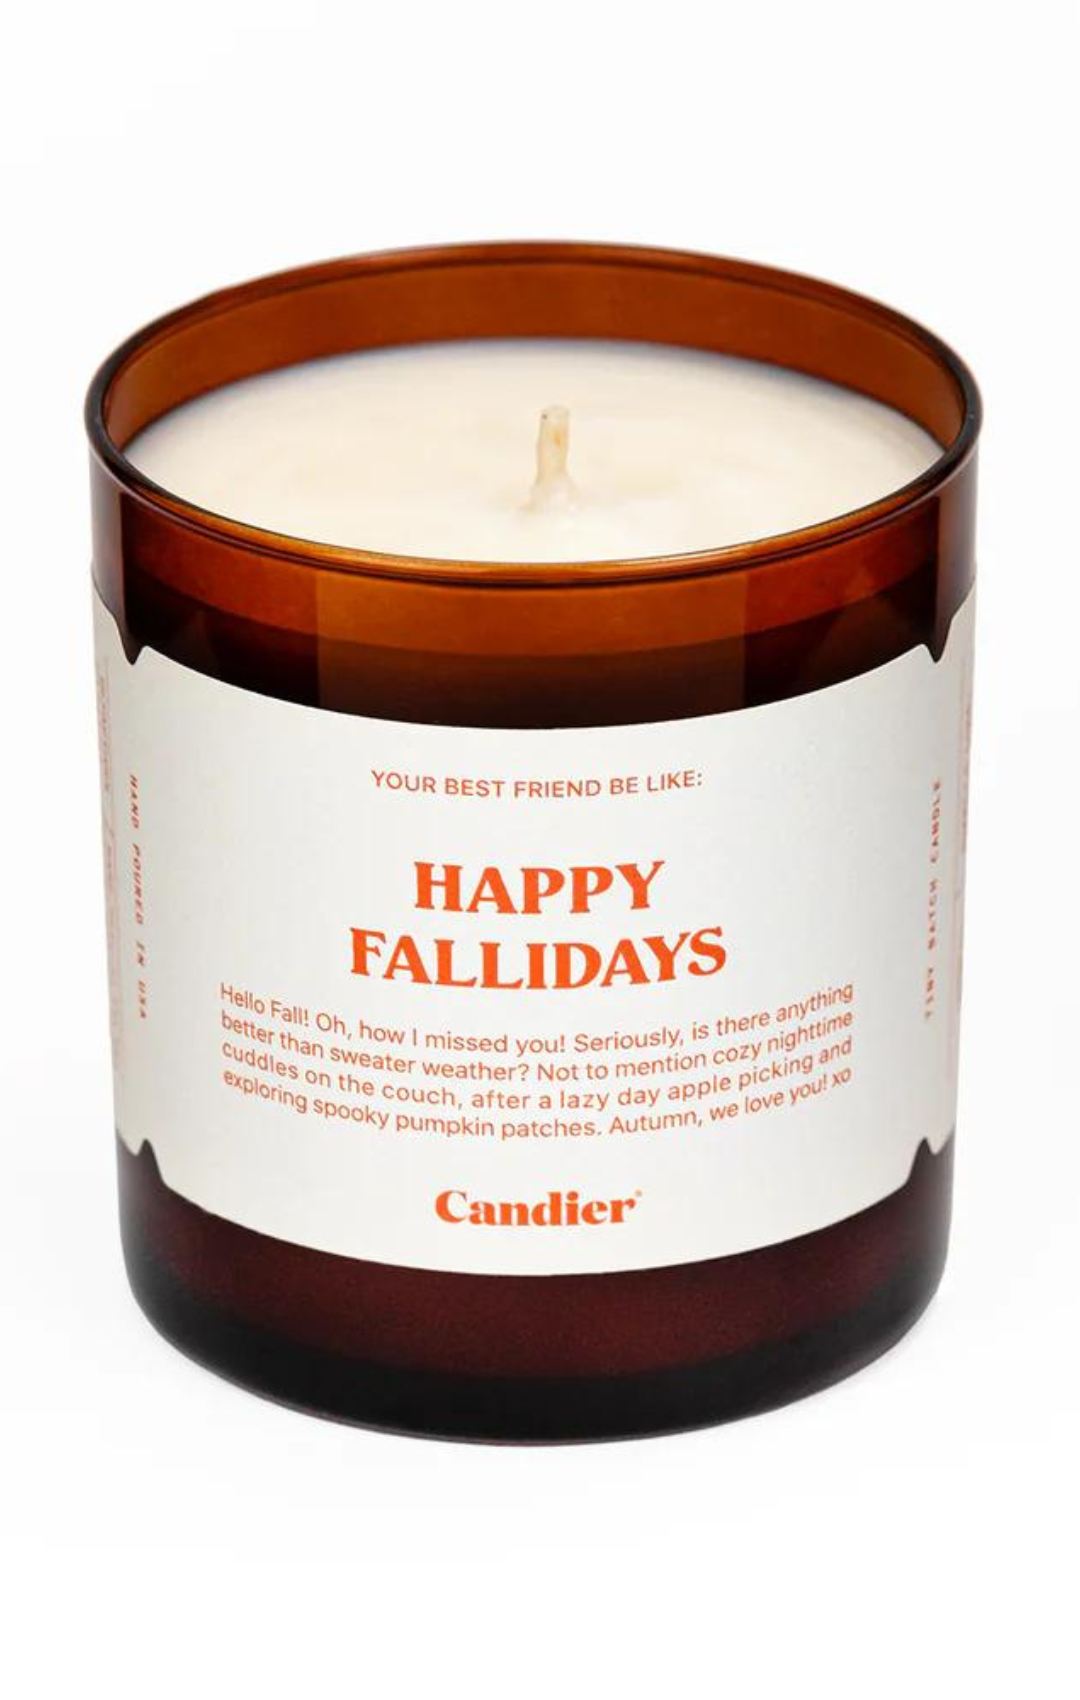 Candier Happy Fallidays Candle